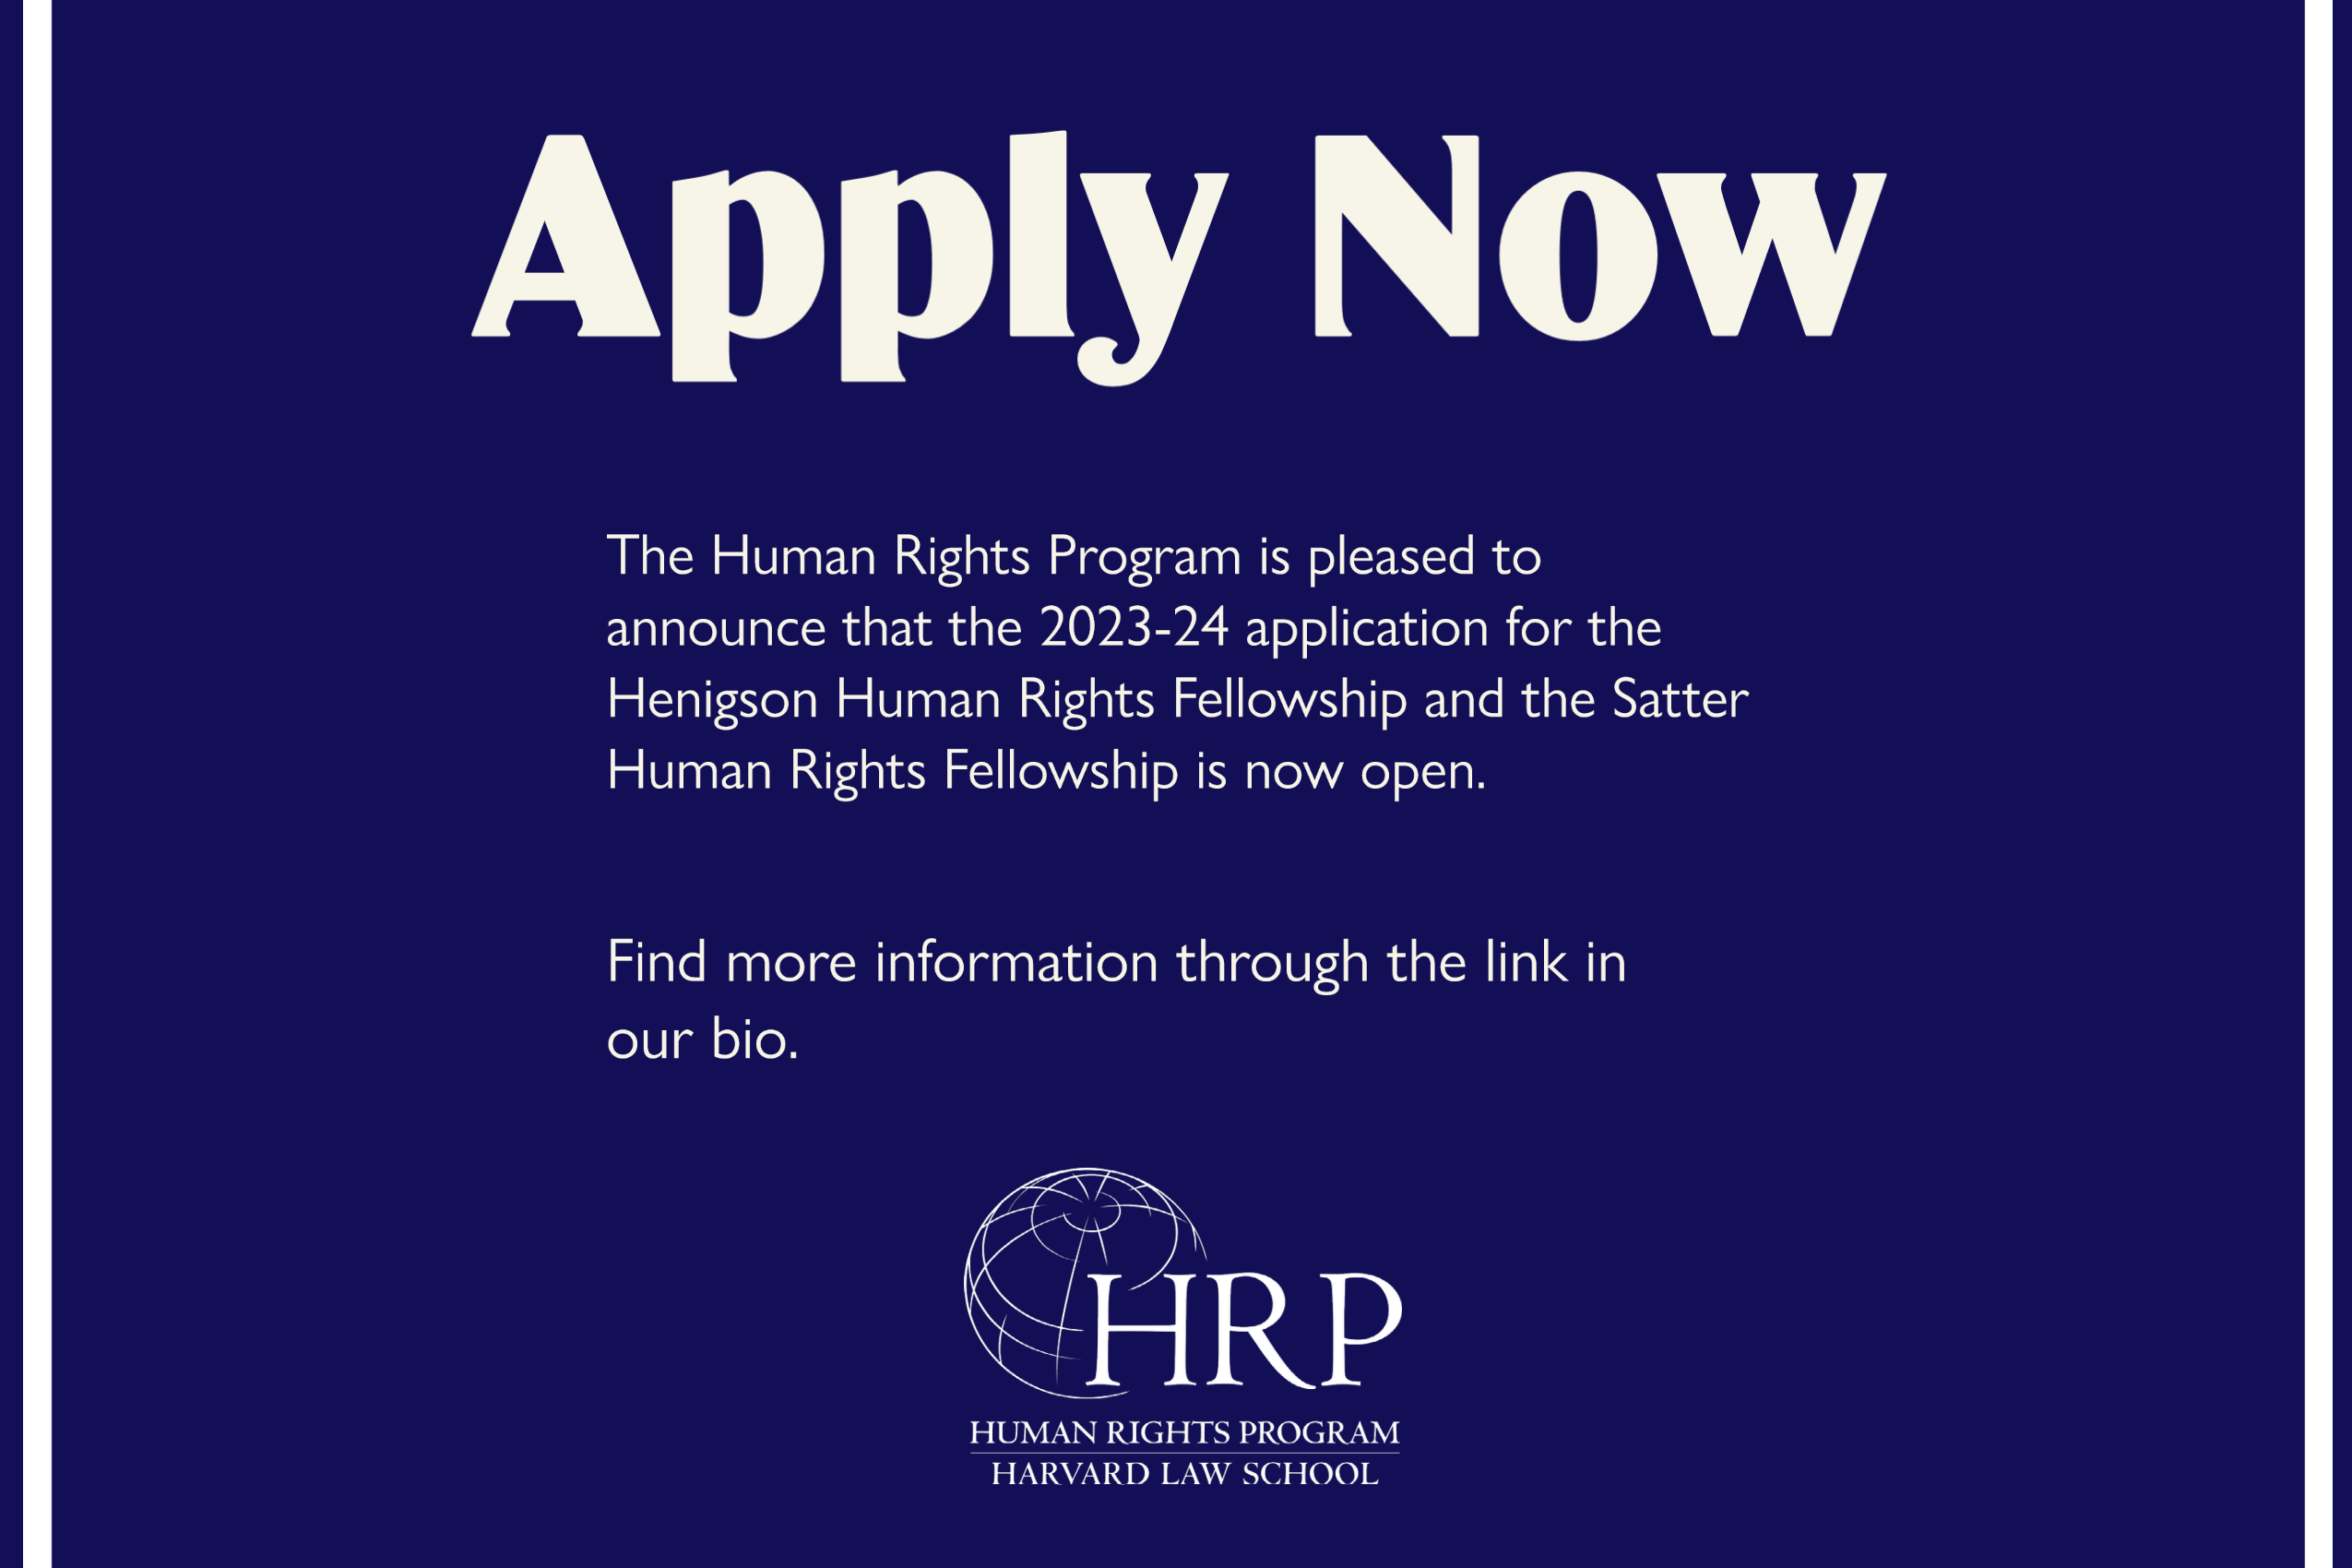 Application to 2023-24 Postgraduate Human Rights Fellowships Now Open